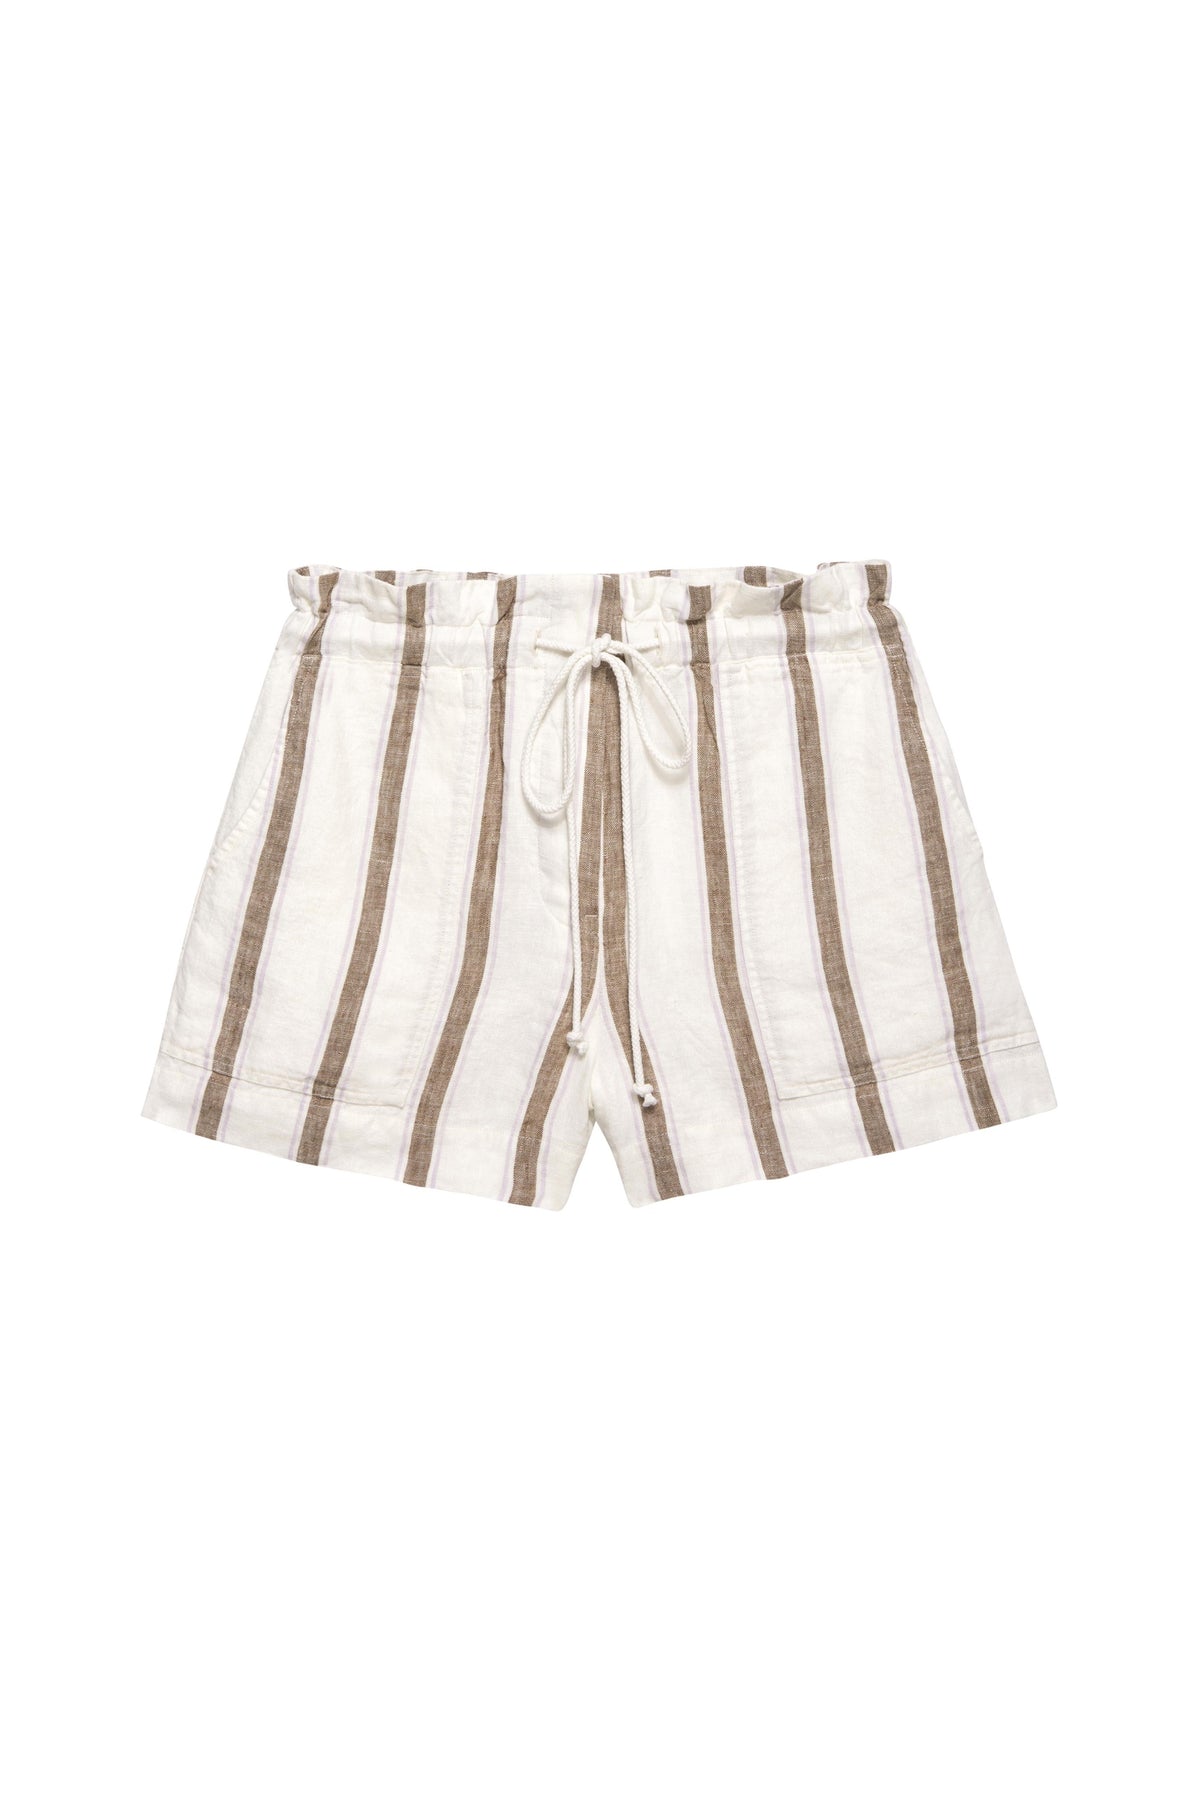 White and brown striped shorts with paper bag waist and tie 